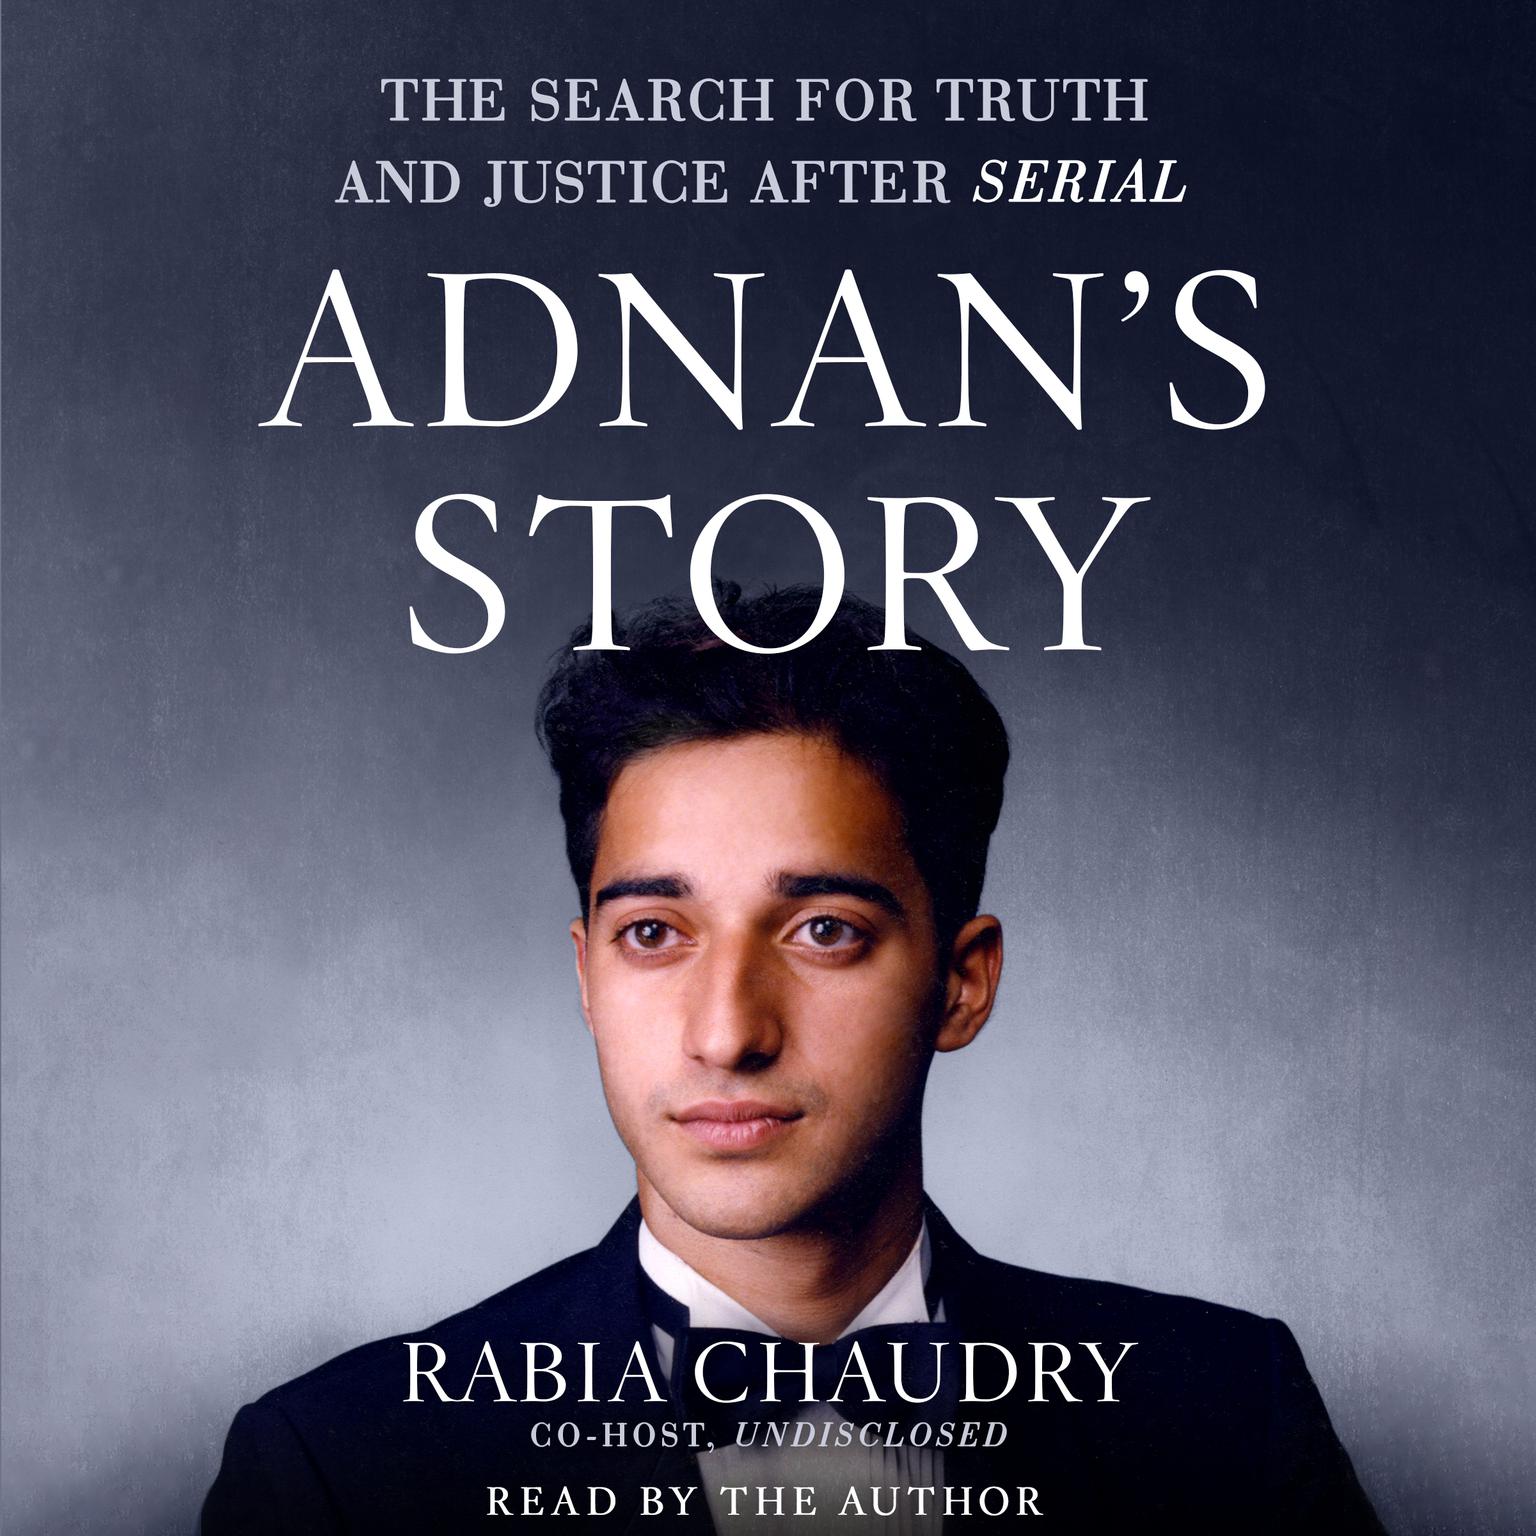 Adnans Story: The Search for Truth and Justice After Serial Audiobook, by Rabia Chaudry